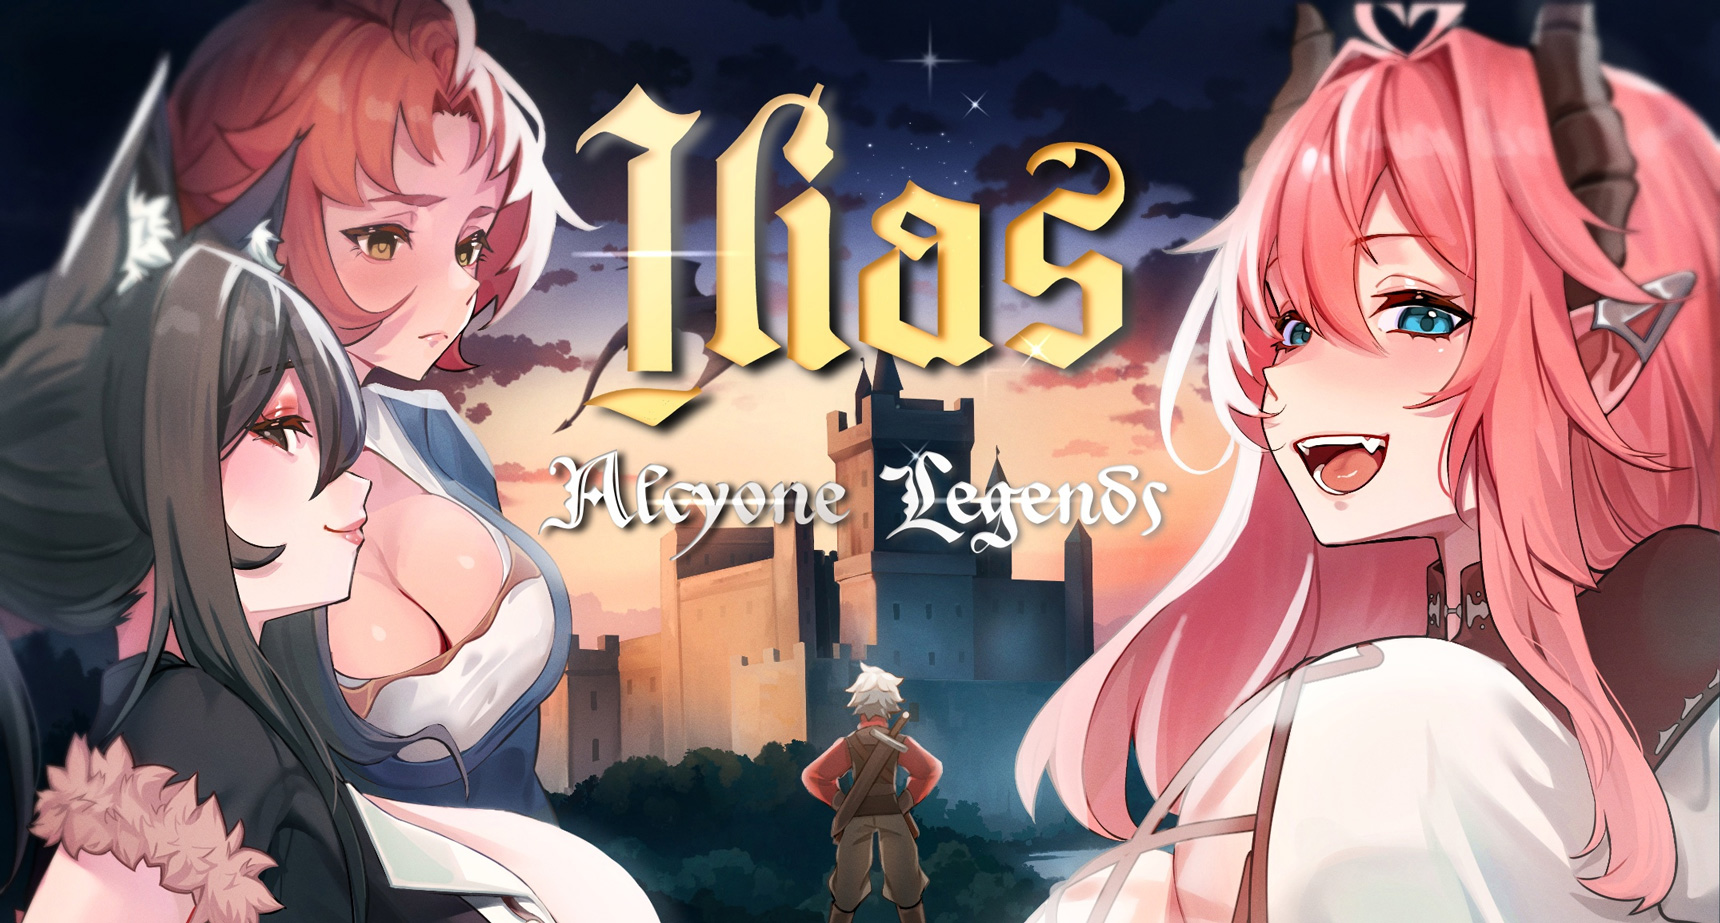 Ilias Alcyone Legends Adult Game Android Apk Download (3)